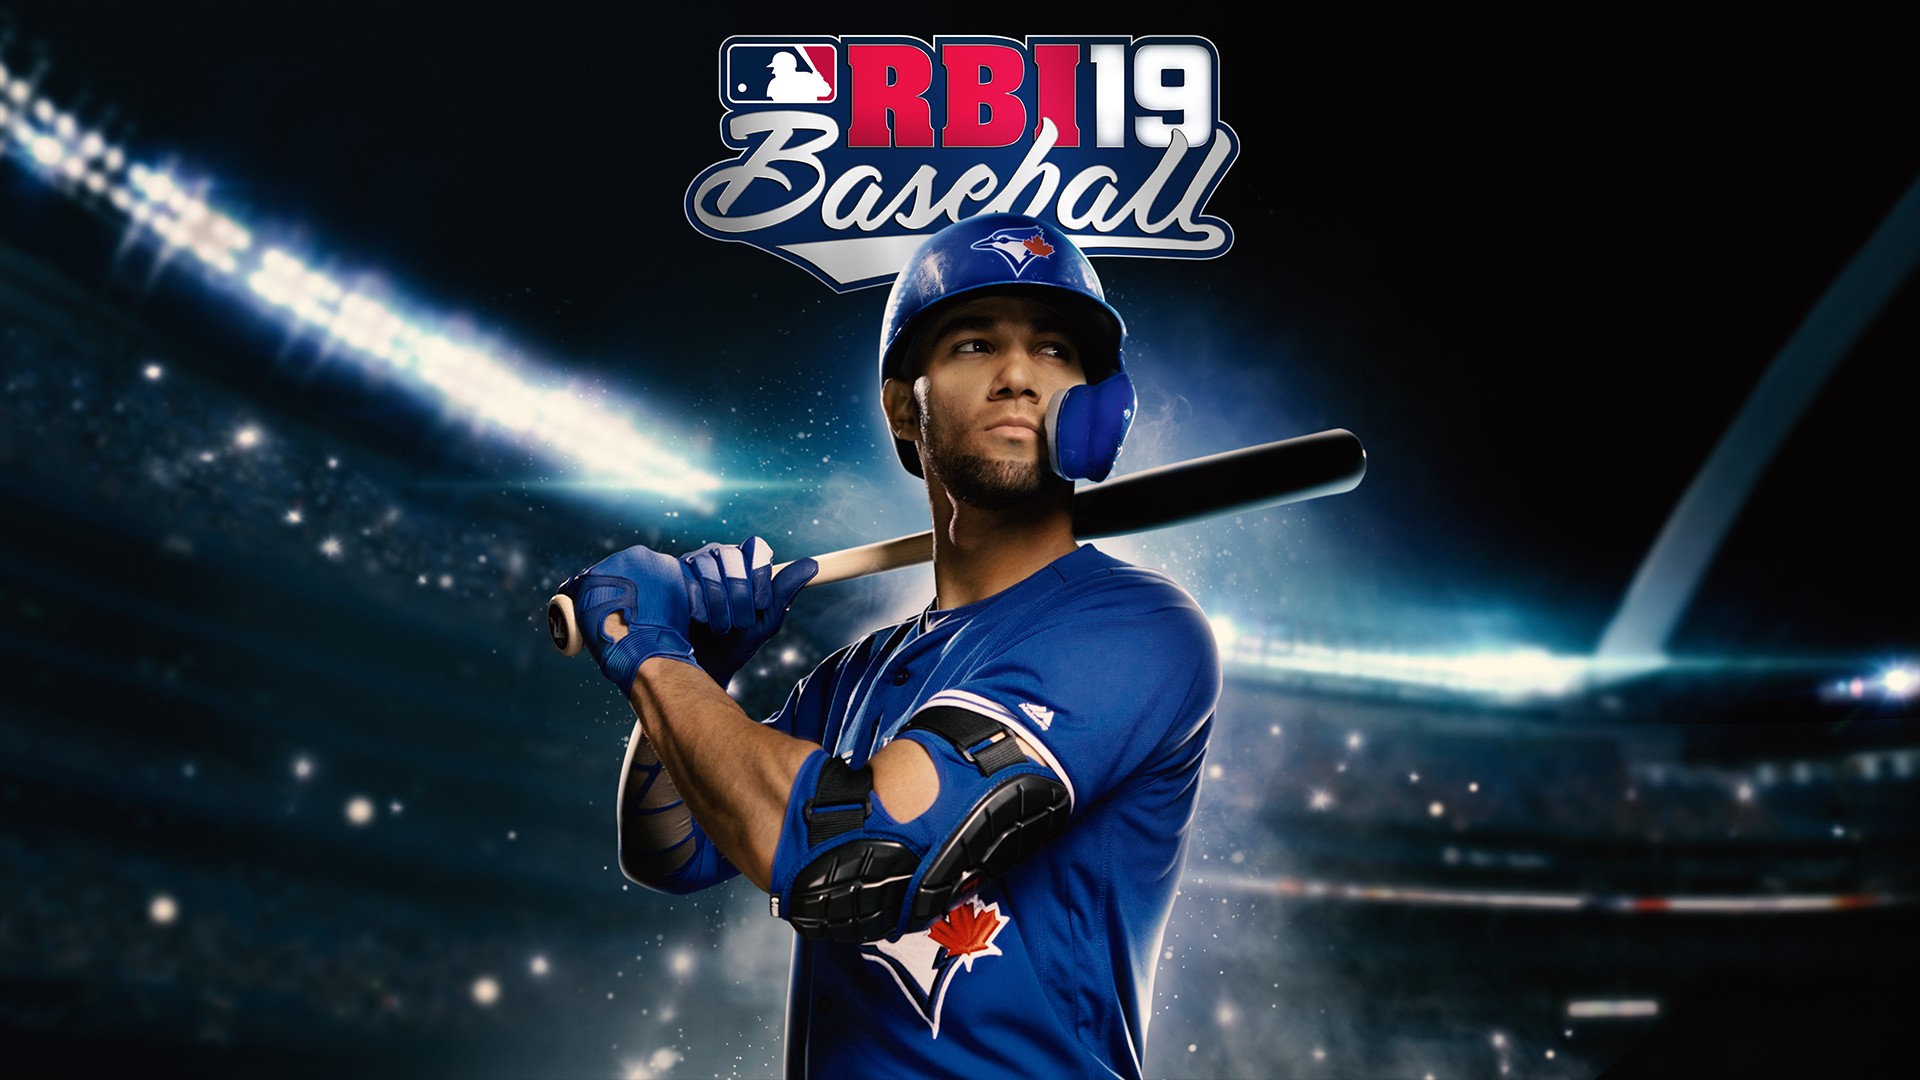 RBI Baseball 19 Available for PlayStation 4, Xbox One and Nintendo Switch Beginning Today